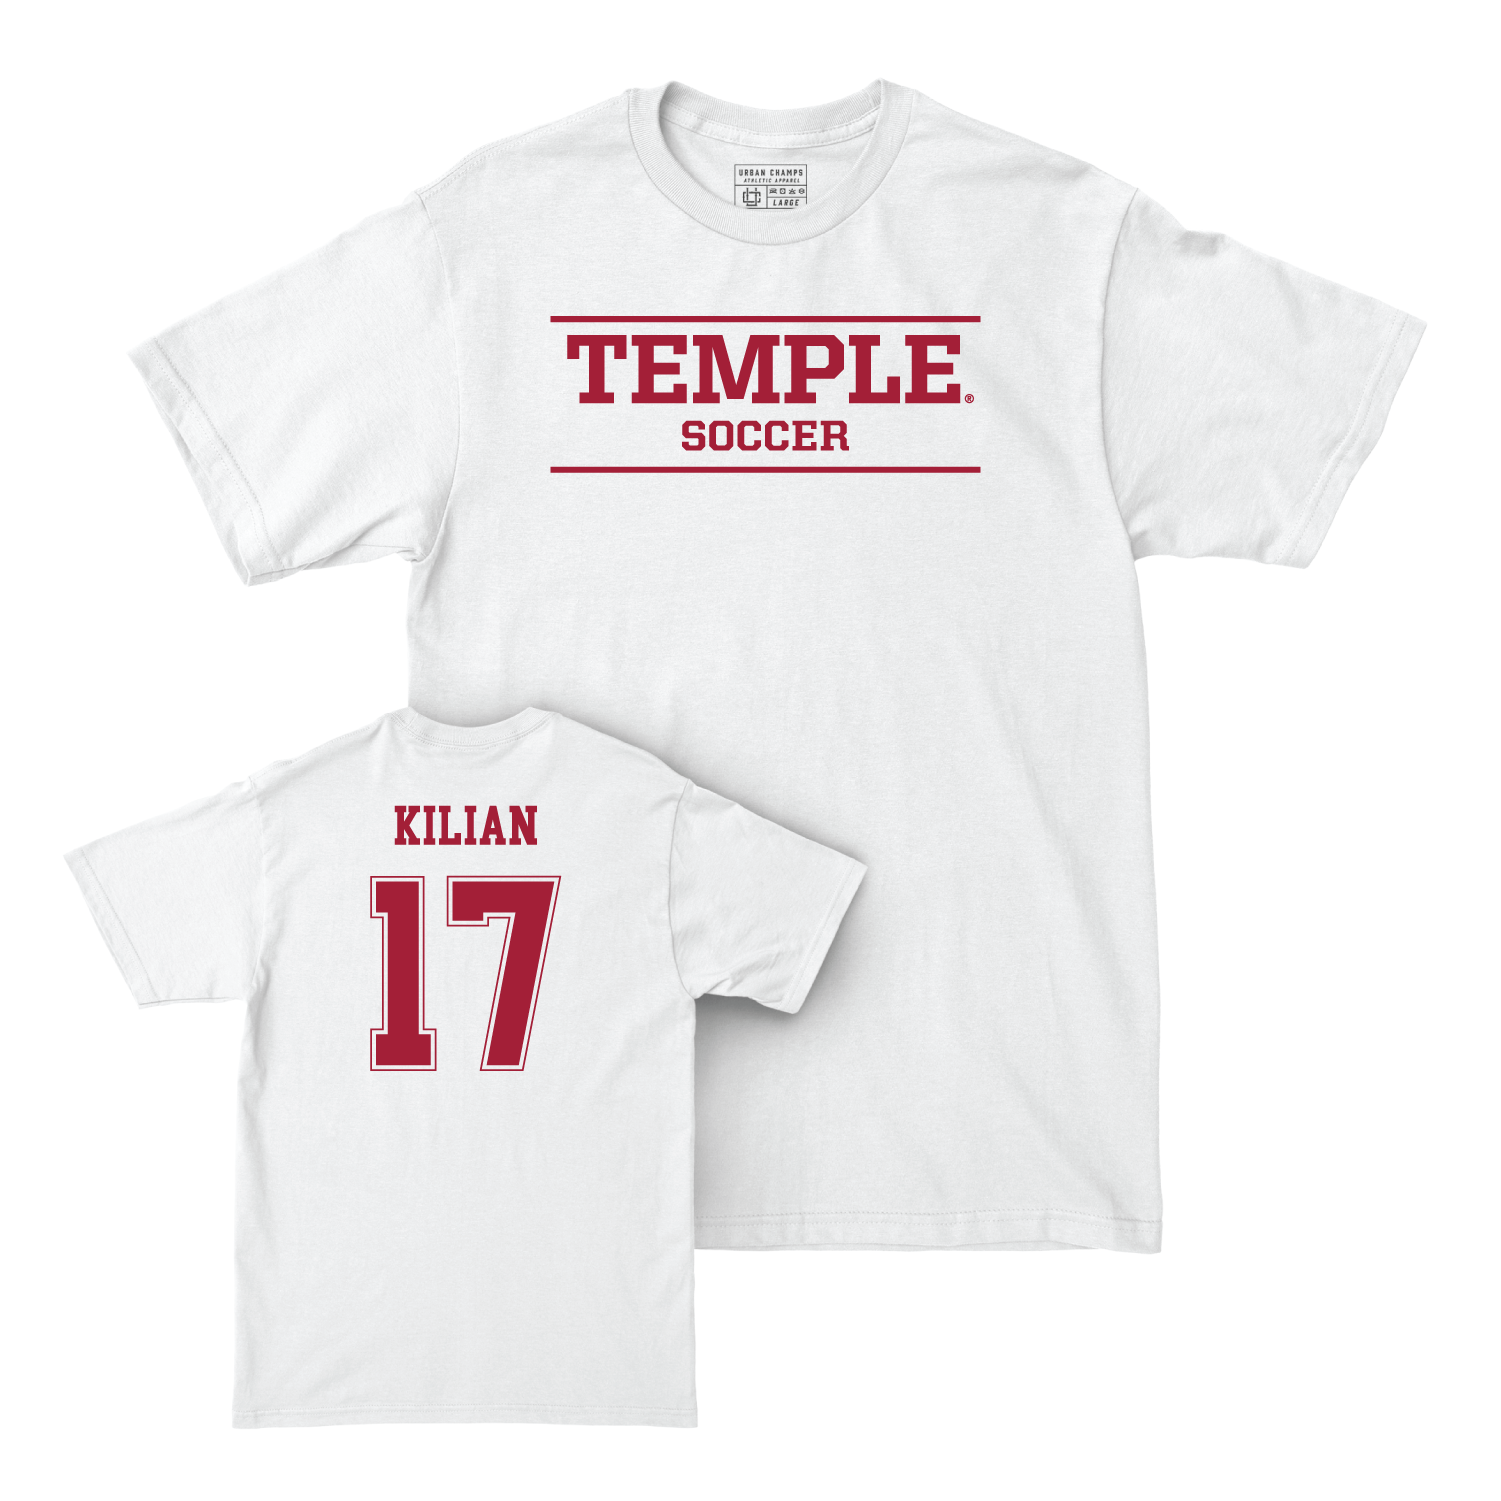 Women's Soccer White Classic Comfort Colors Tee - Fiona Kilian Youth Small